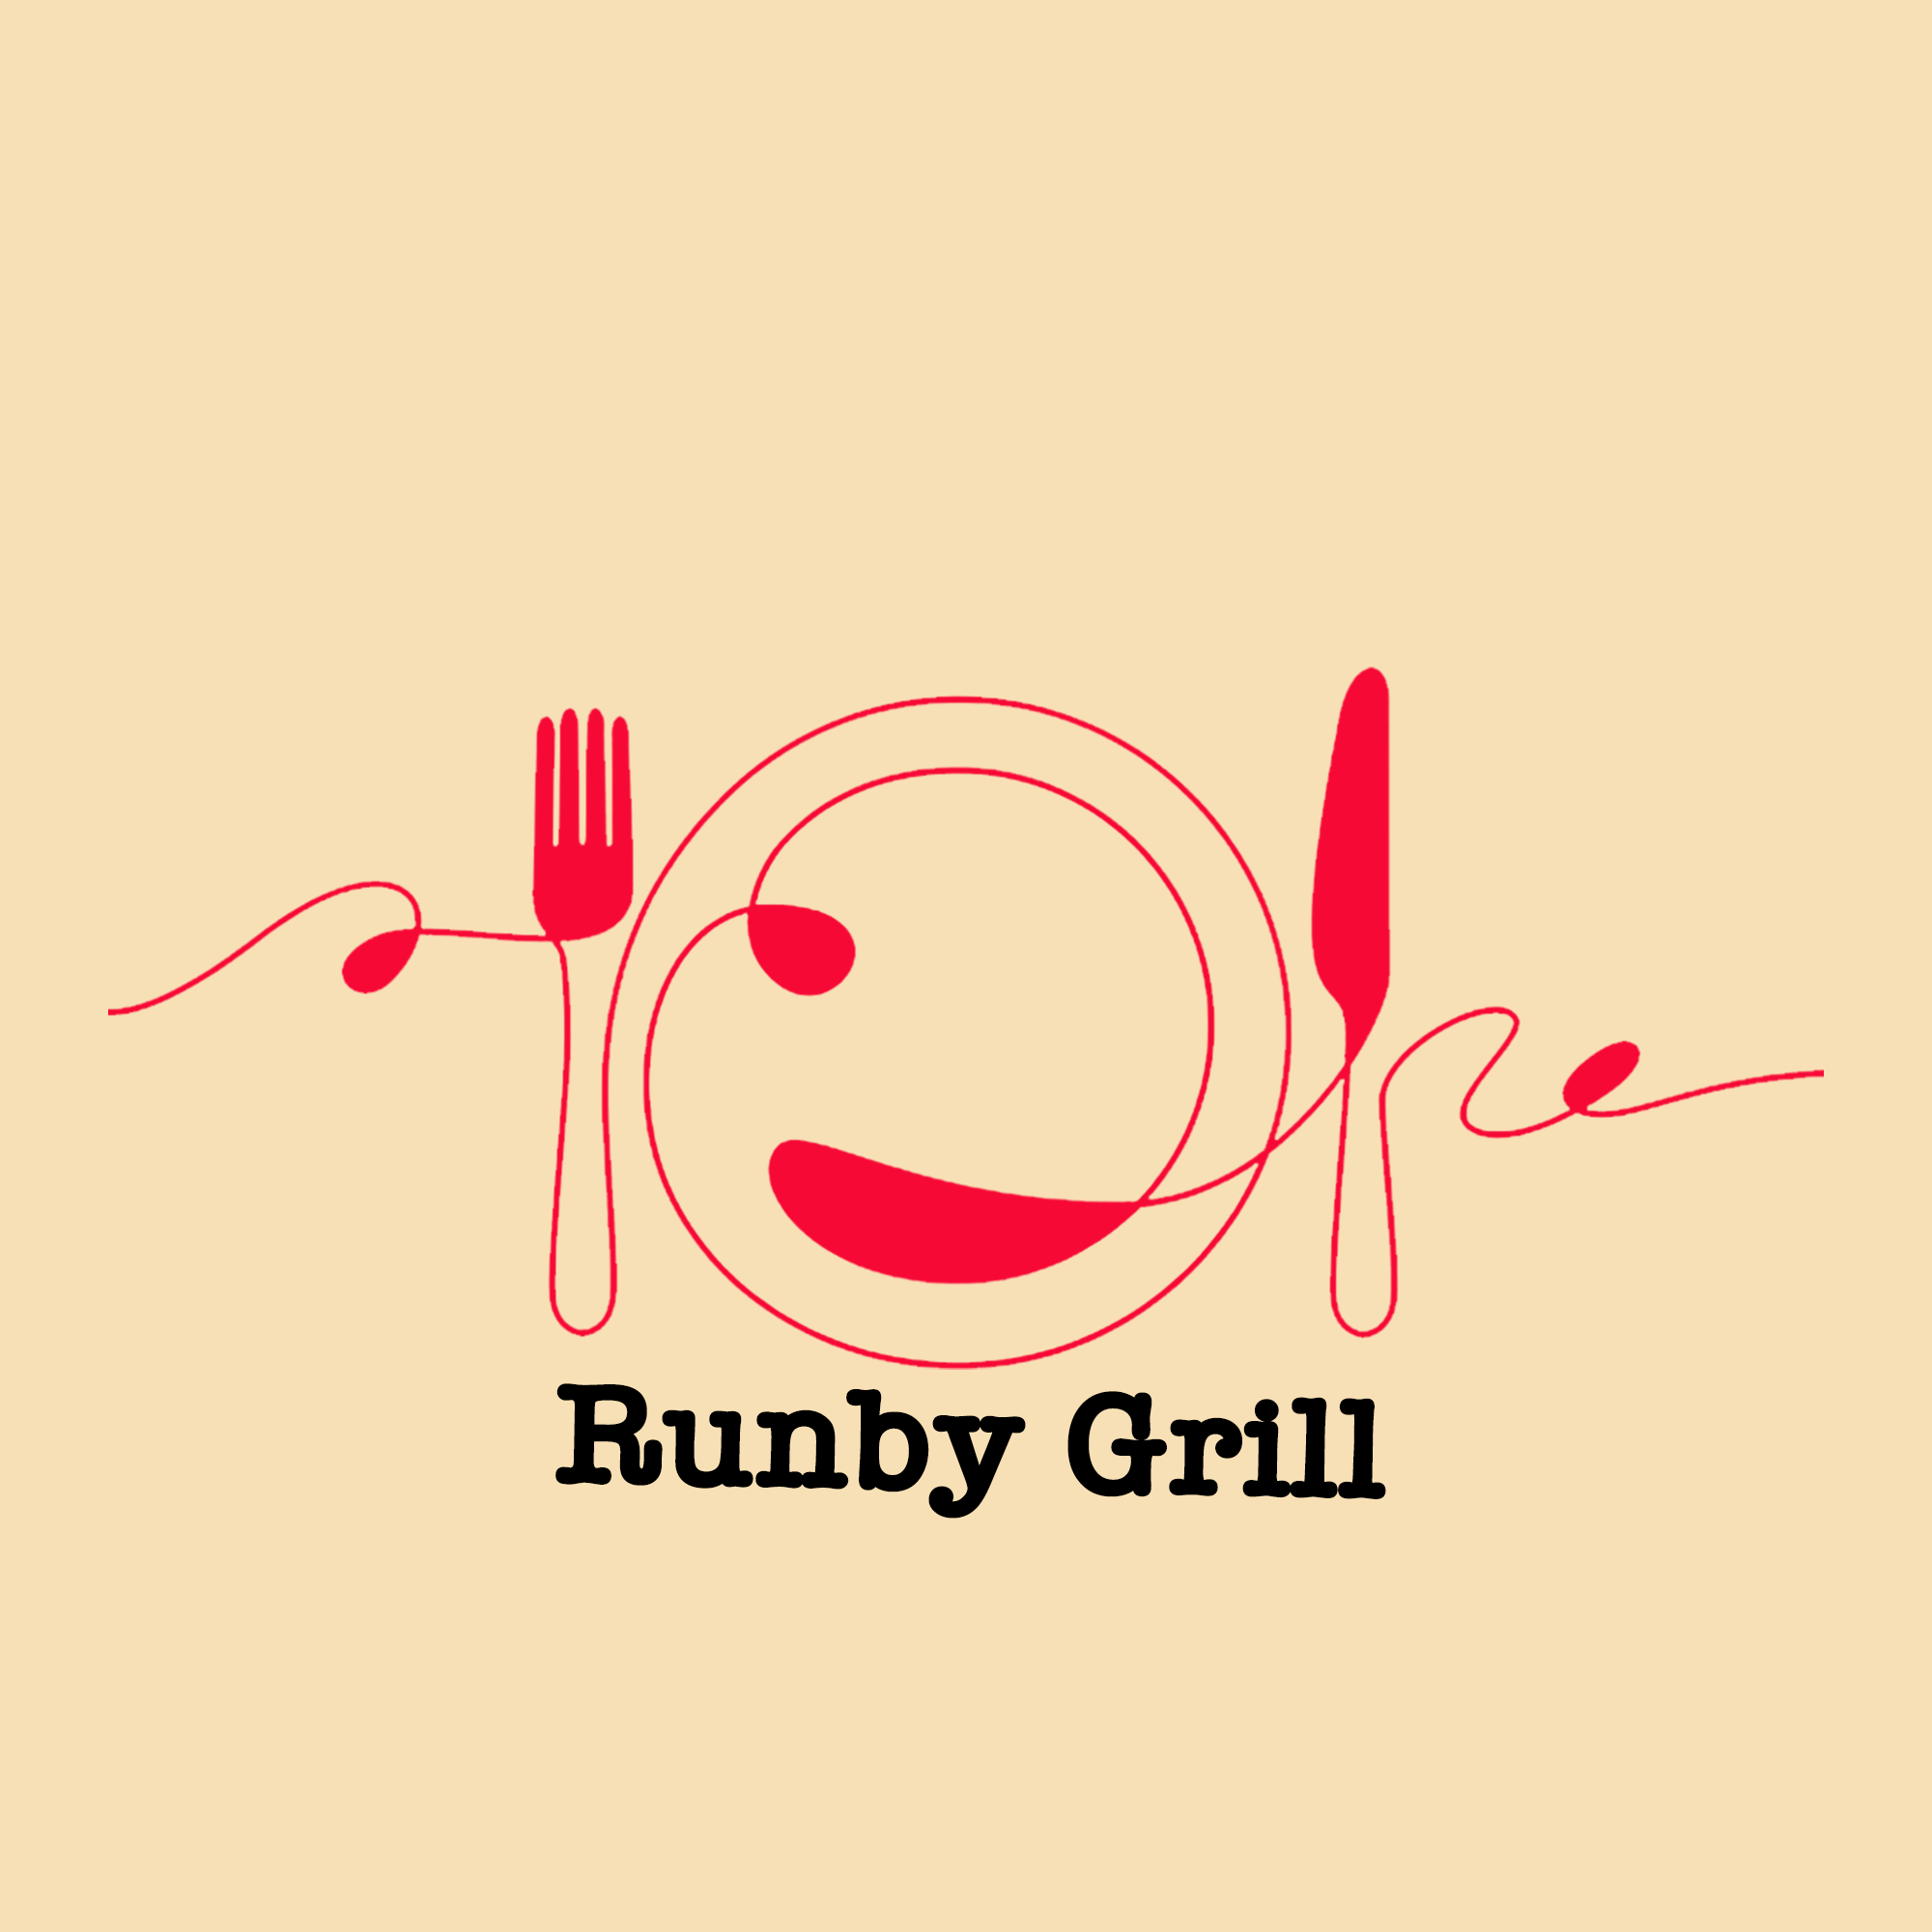 RUNBY GRILL